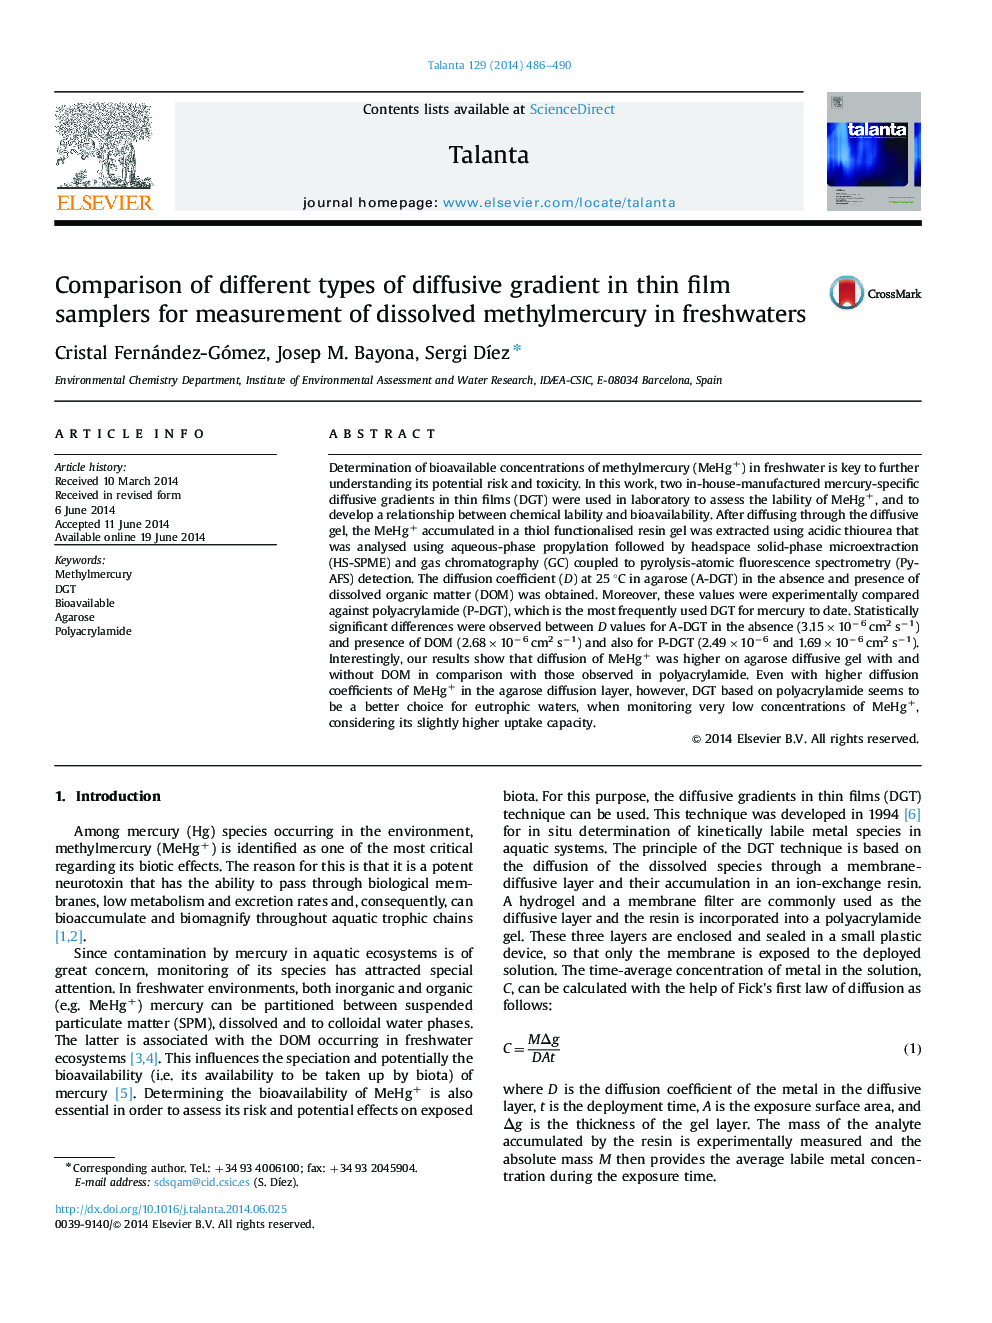 Comparison of different types of diffusive gradient in thin film samplers for measurement of dissolved methylmercury in freshwaters